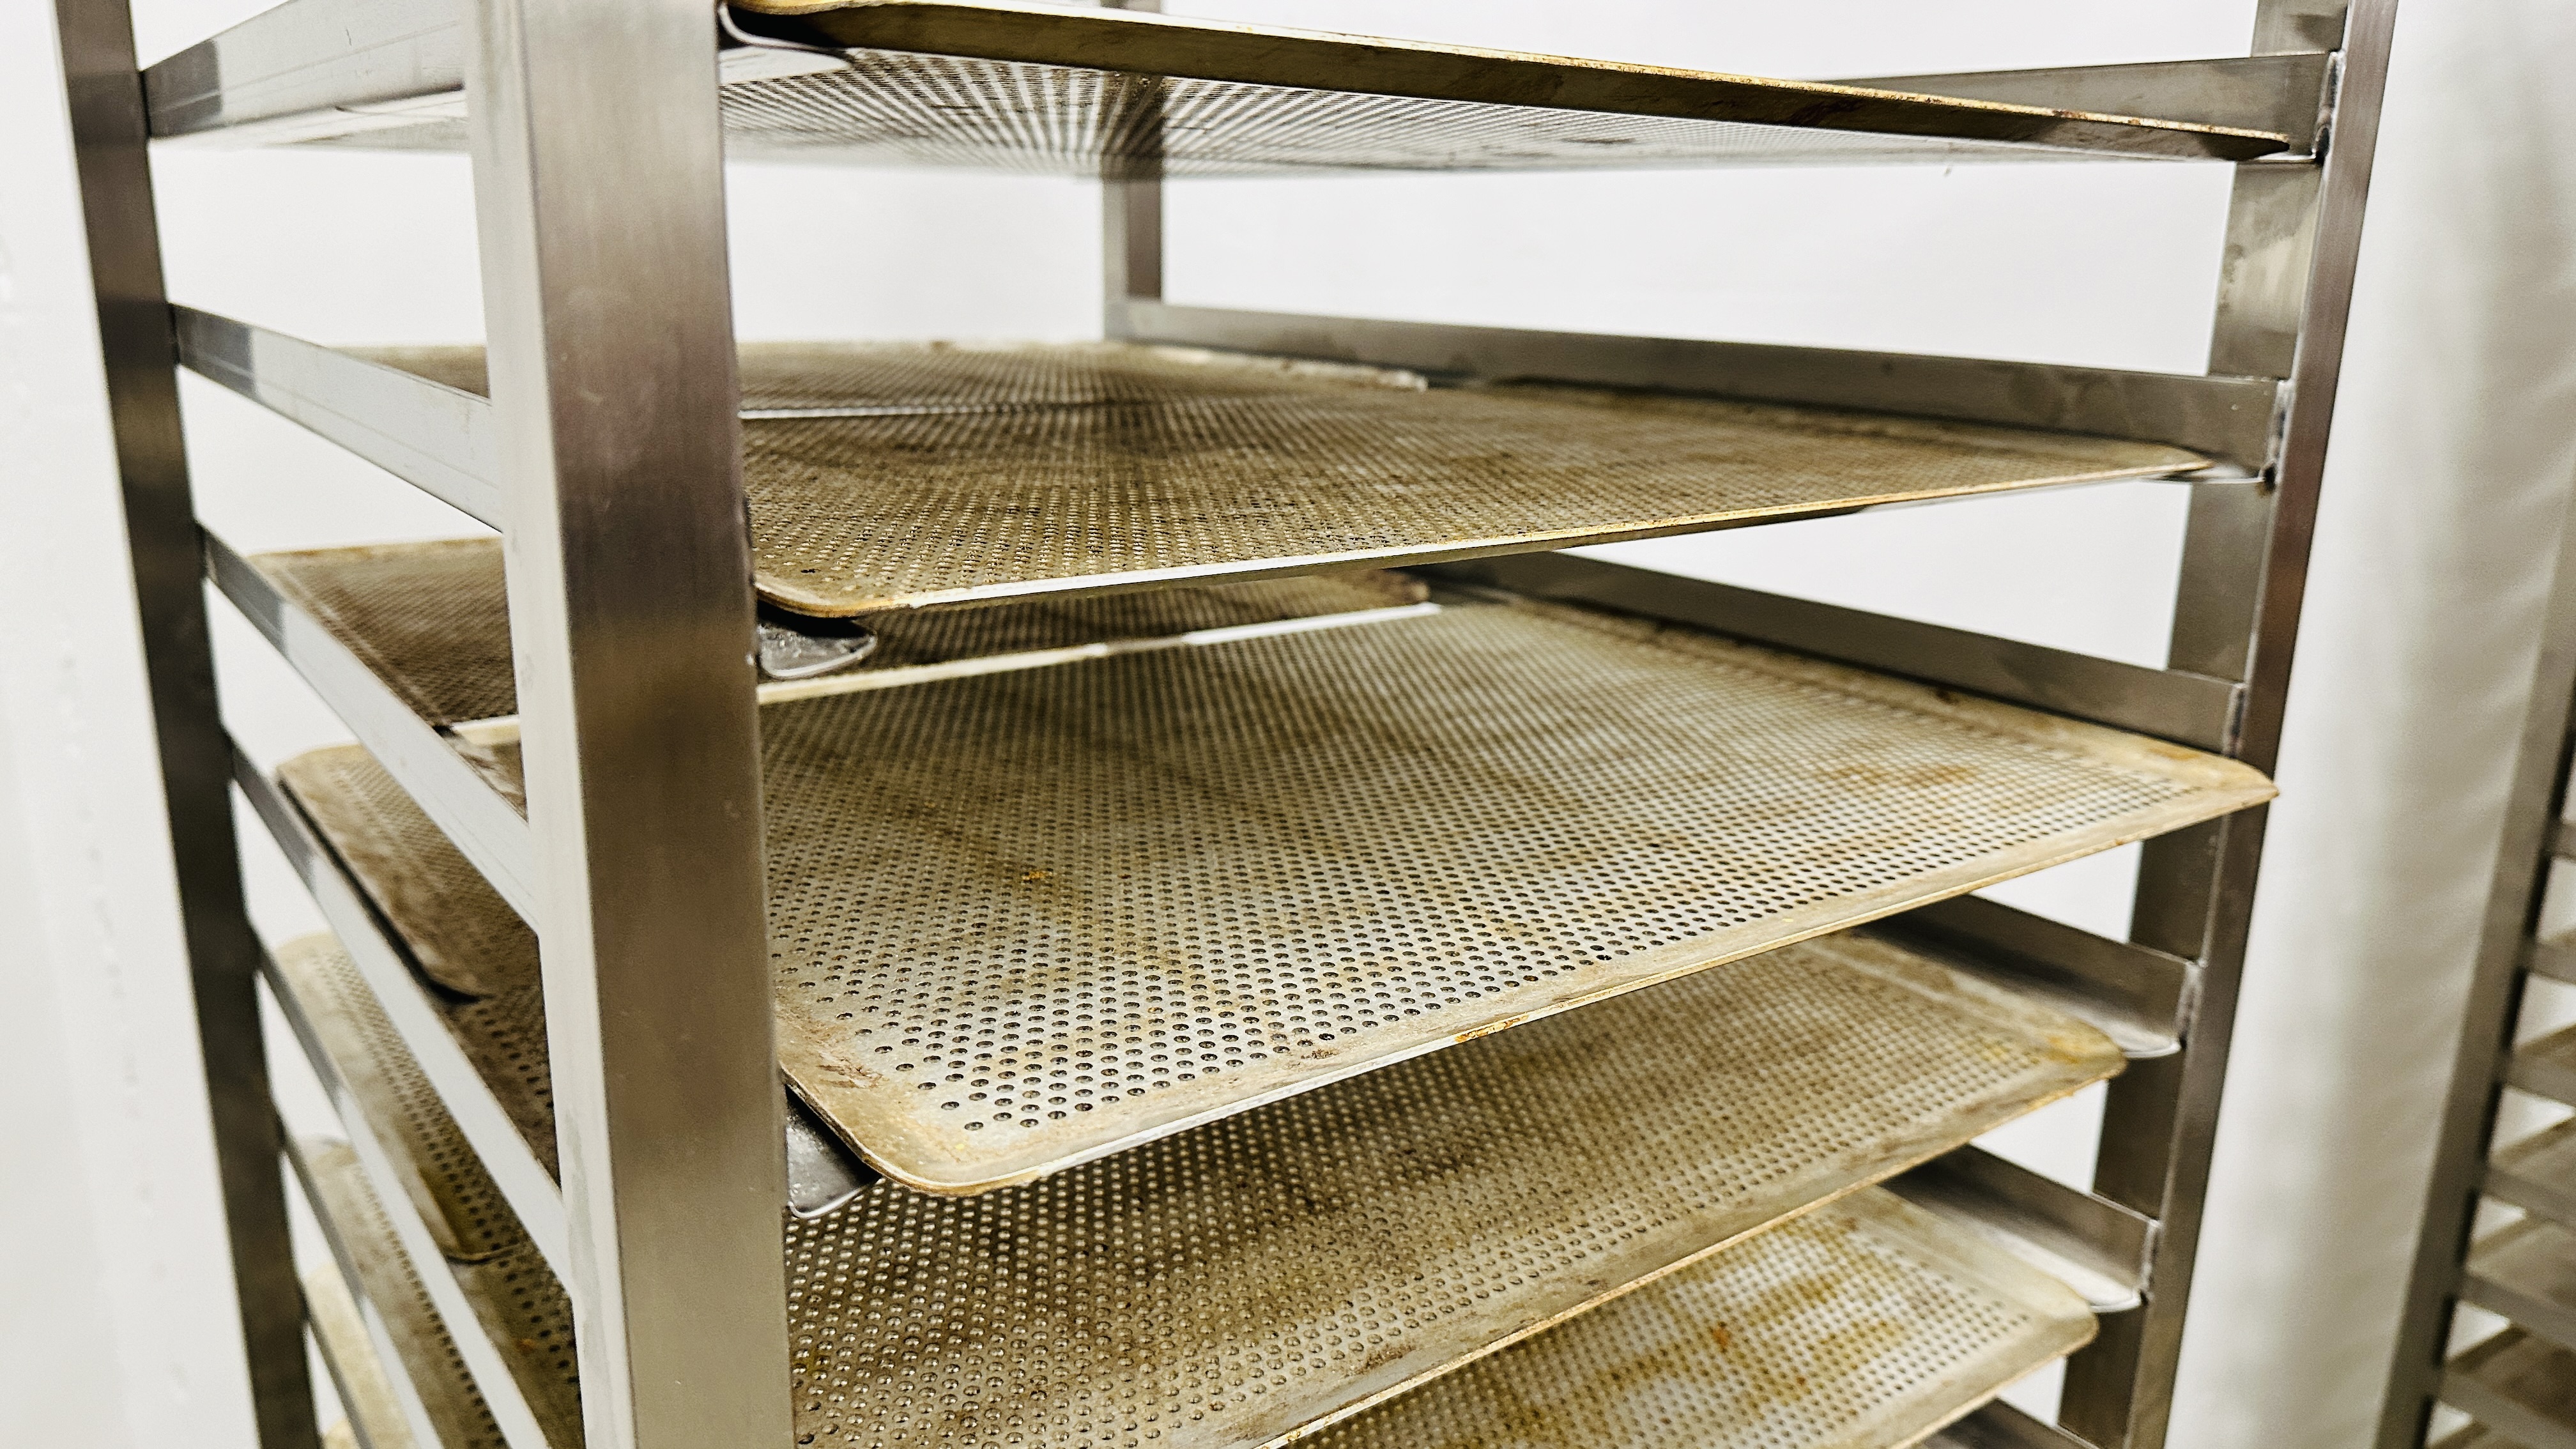 STAINLESS STEEL 20 TIER COMMERCIAL WHEELED BAKING TRAY RACK COMPLETE WITH TRAYS - HEIGHT 182CM. - Image 7 of 7